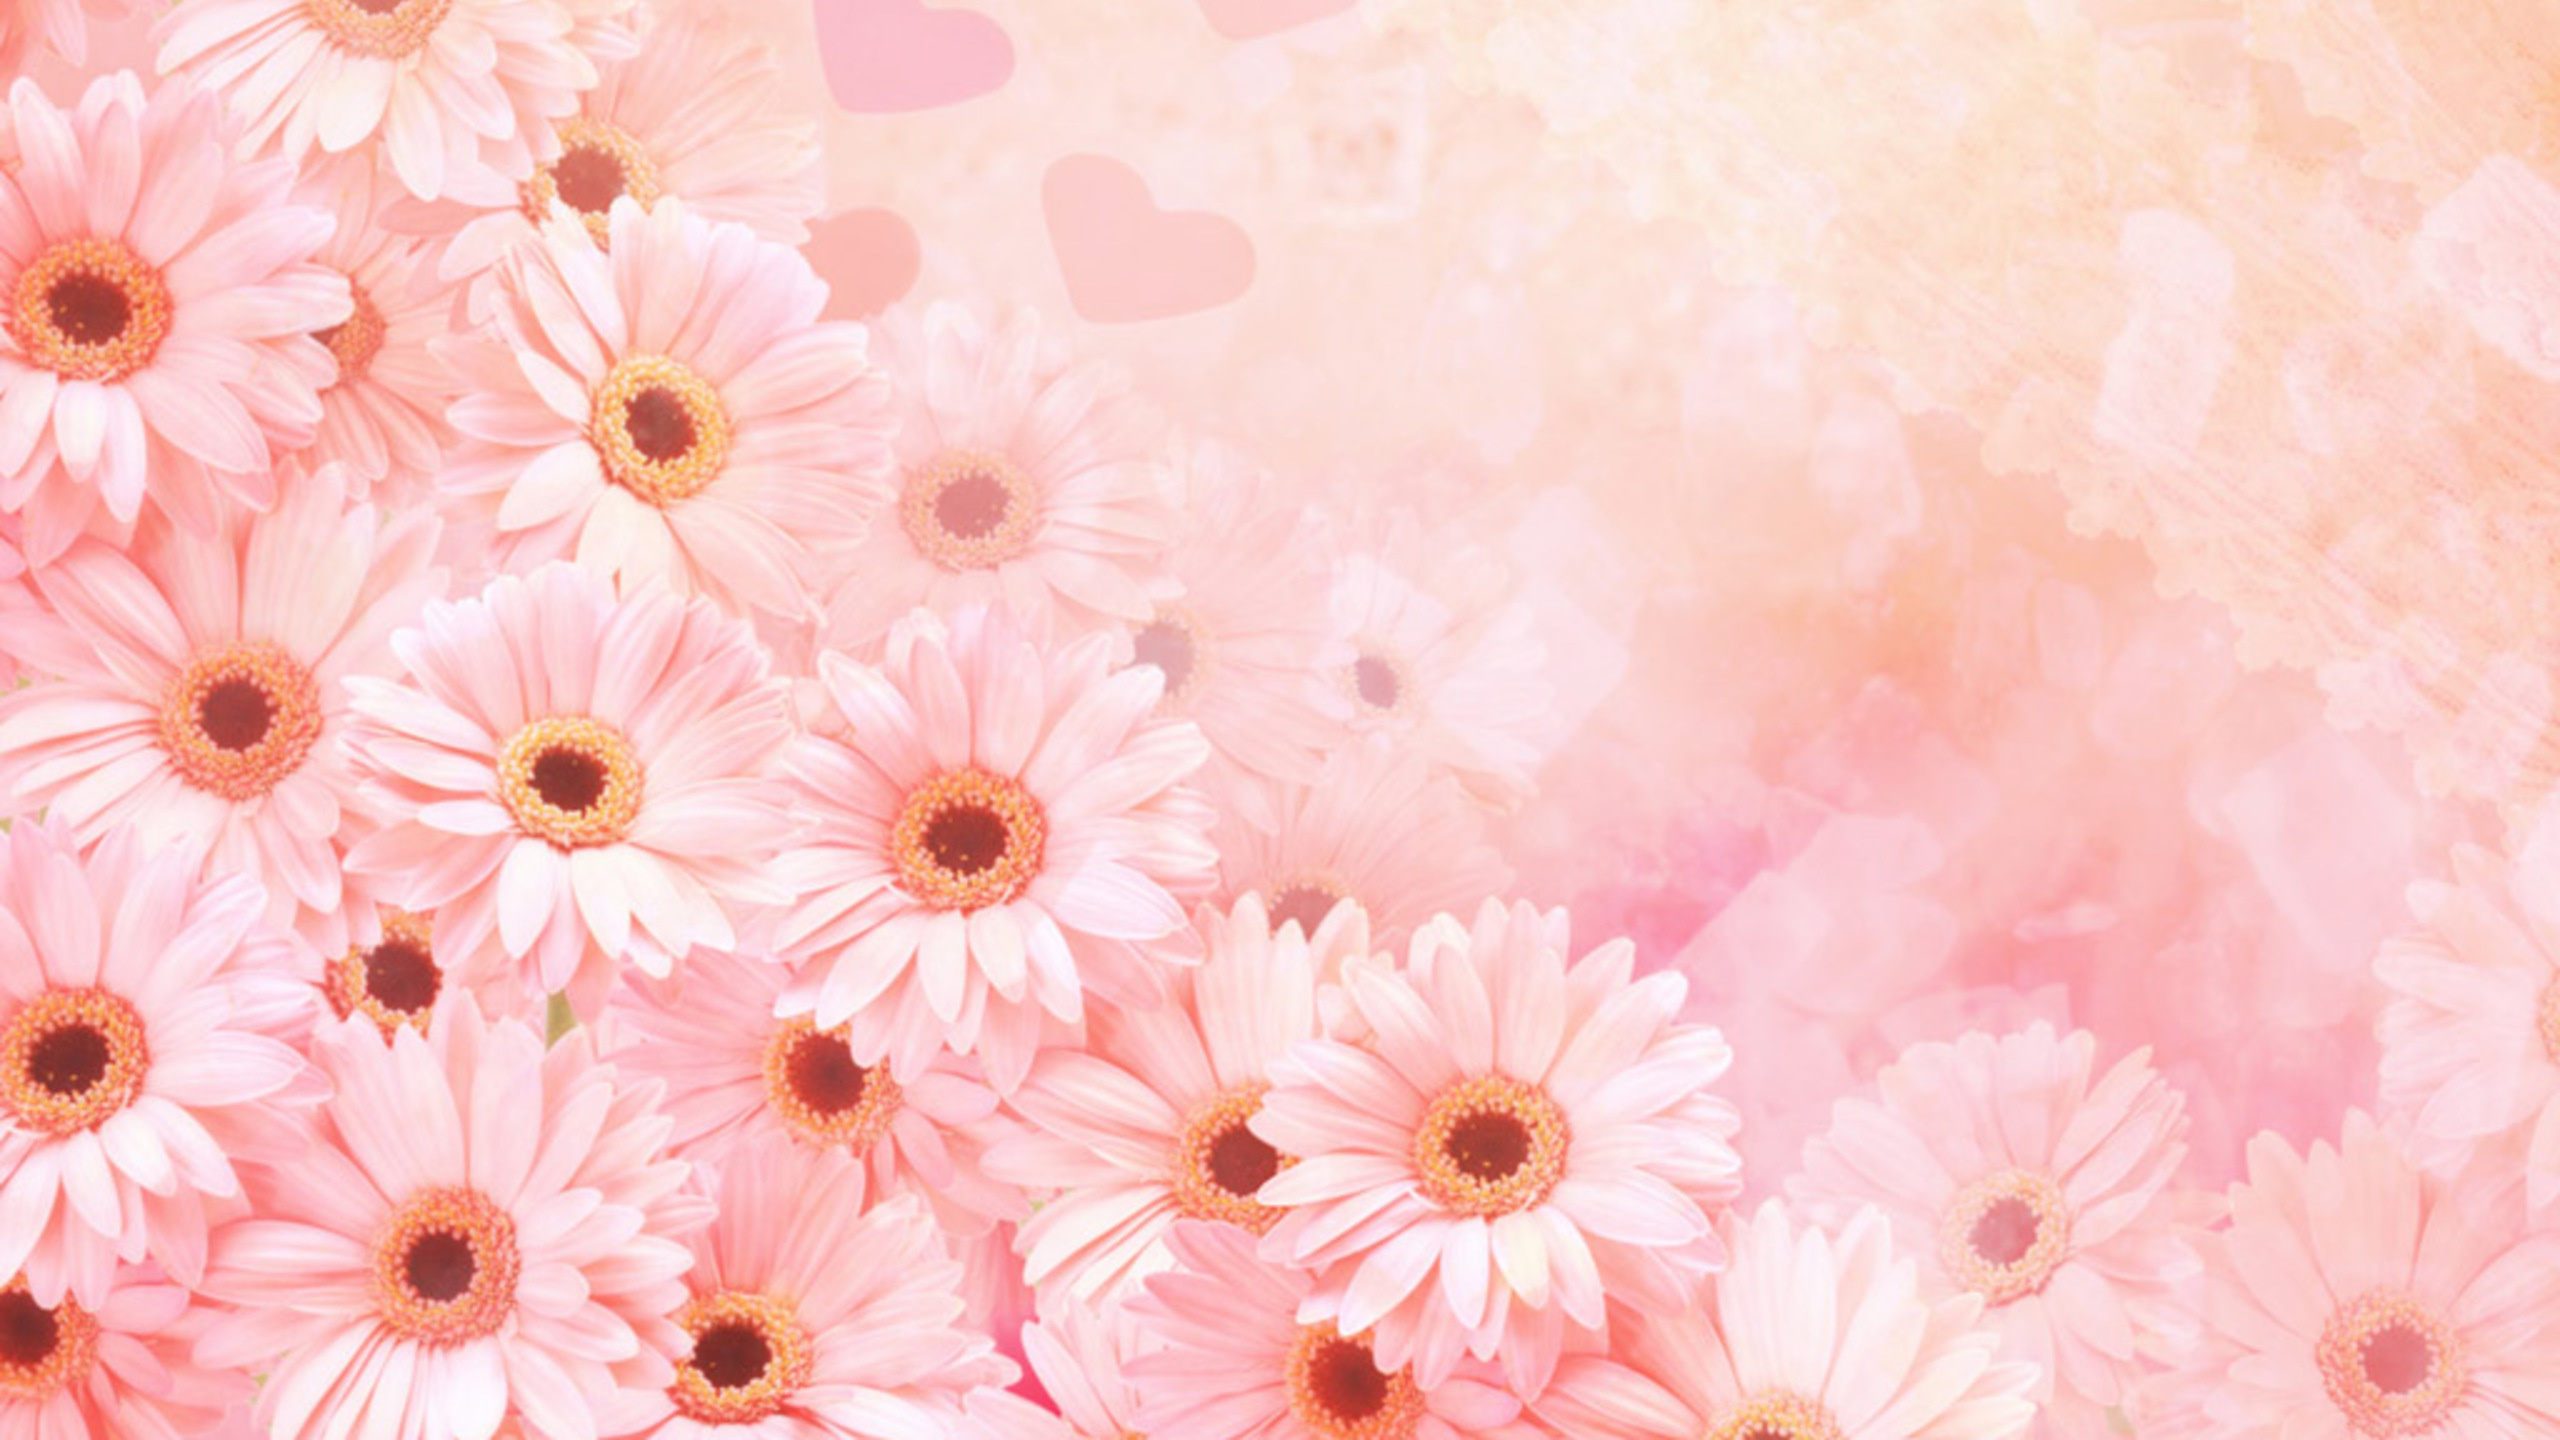 Pink and White Floral Textile. Wallpaper in 2560x1440 Resolution